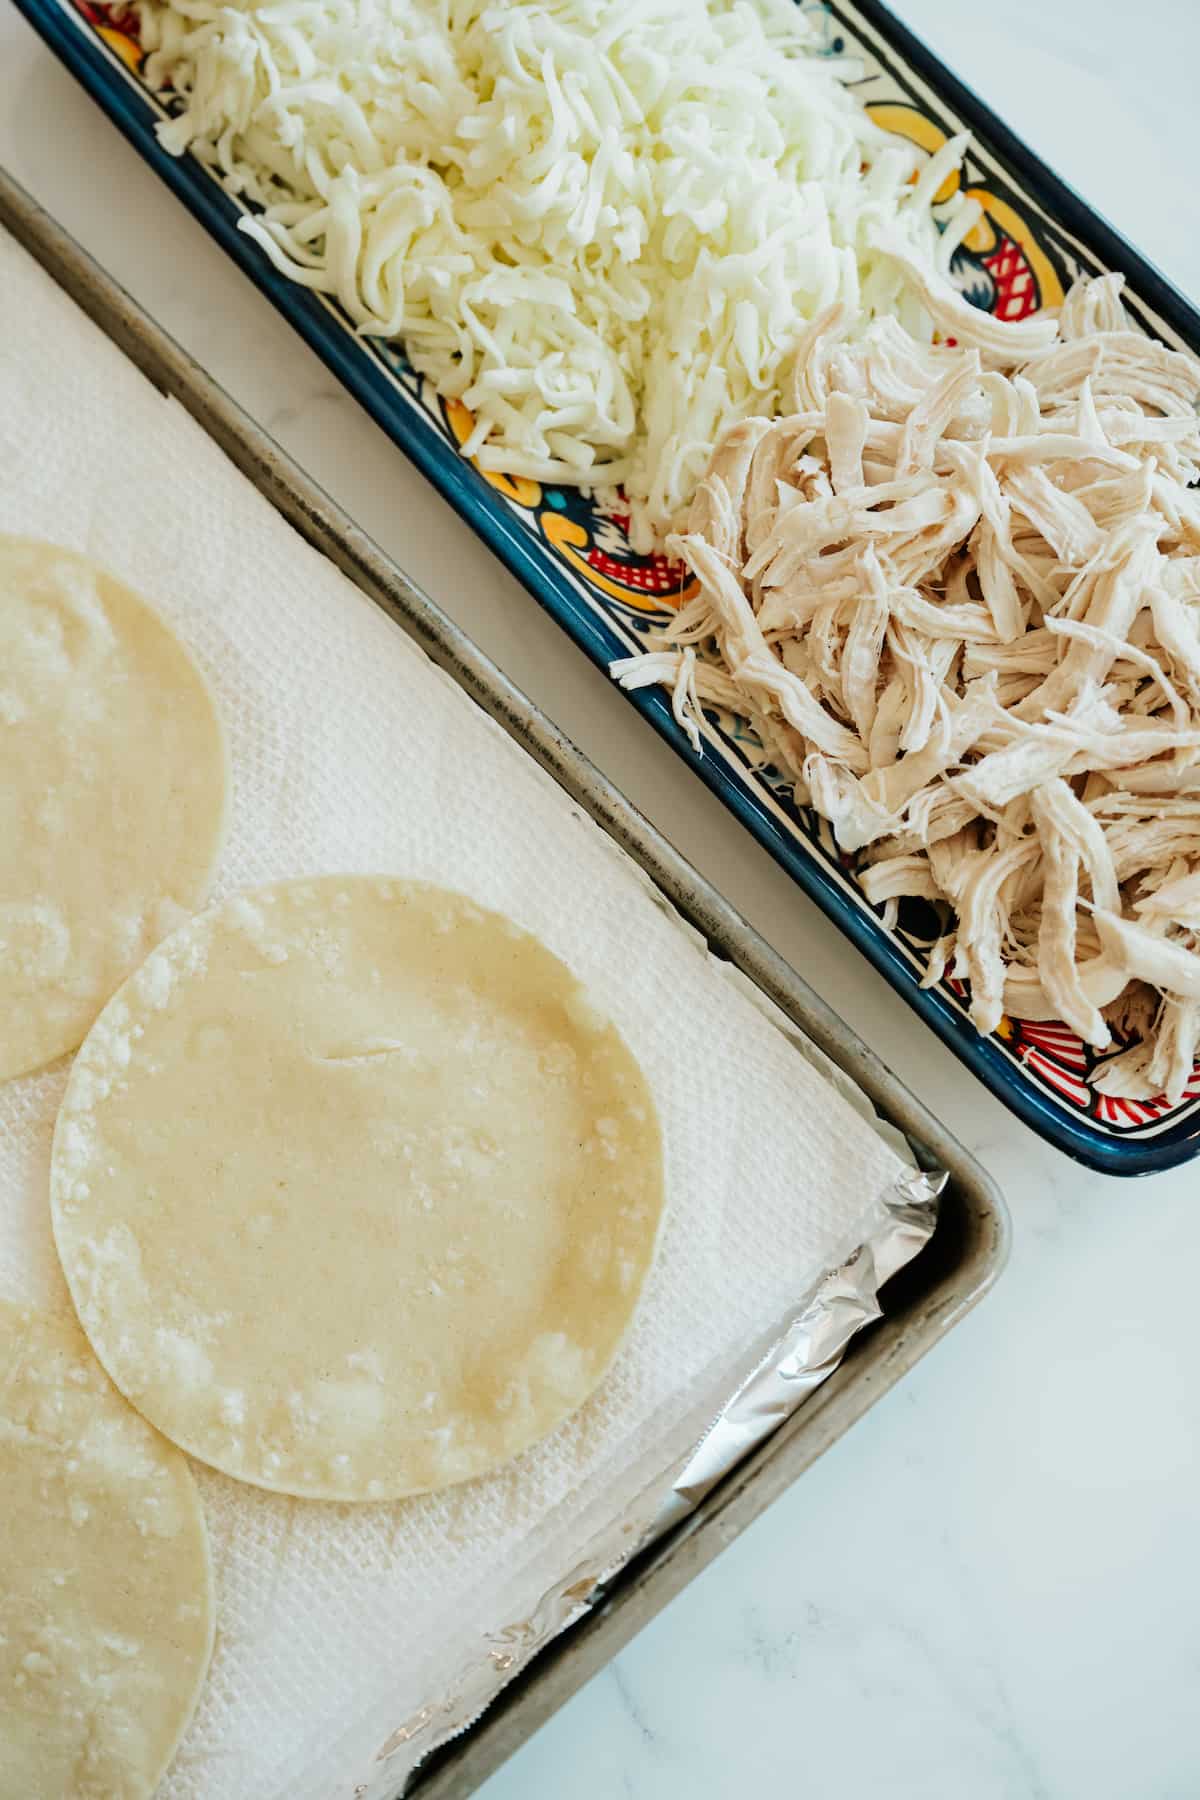 shredded poached chicken breast and cheese on a rectangular plate next to a sheet pan with fried corn tortillas draining on paper towels. 